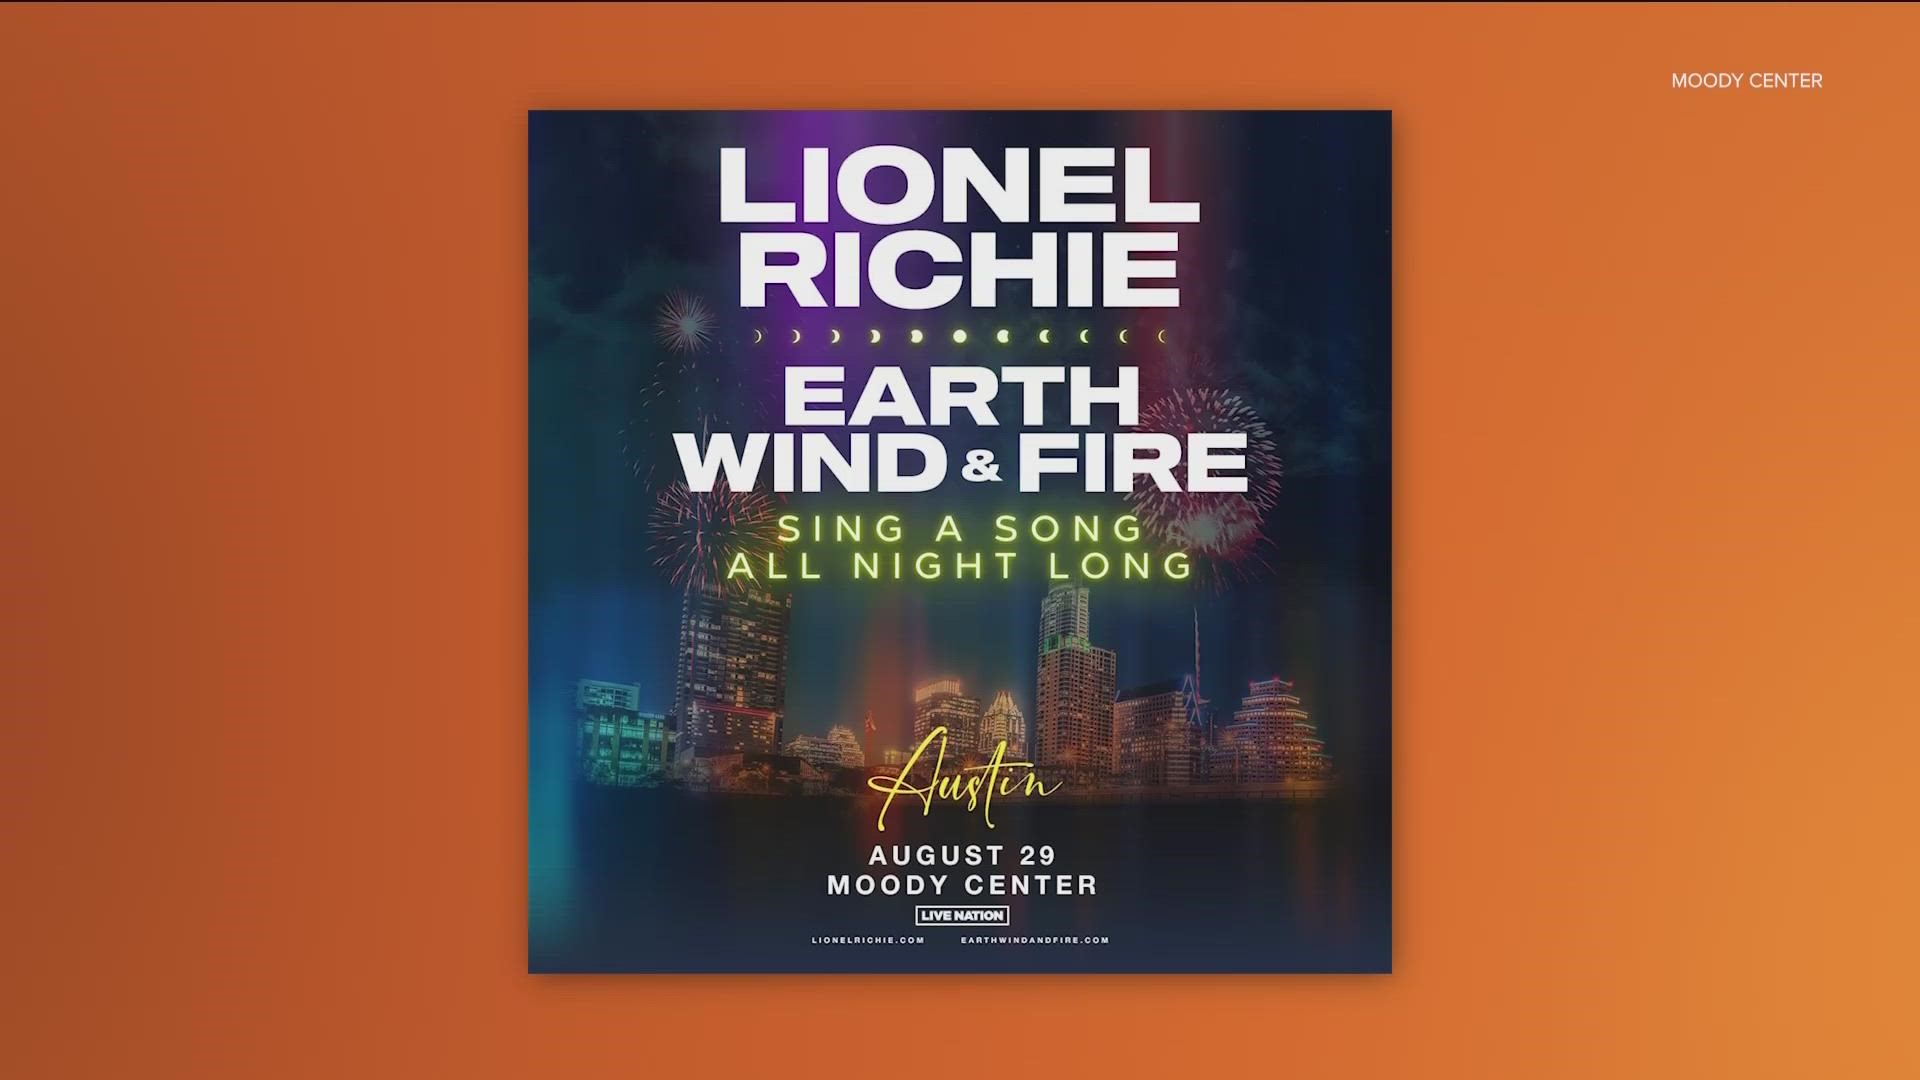 Kid Rock is coming to Moody Center in June, with special guest Chris Janson. Meanwhile, Lionel Richie will join Earth, Wind & Fire at the venue in August.